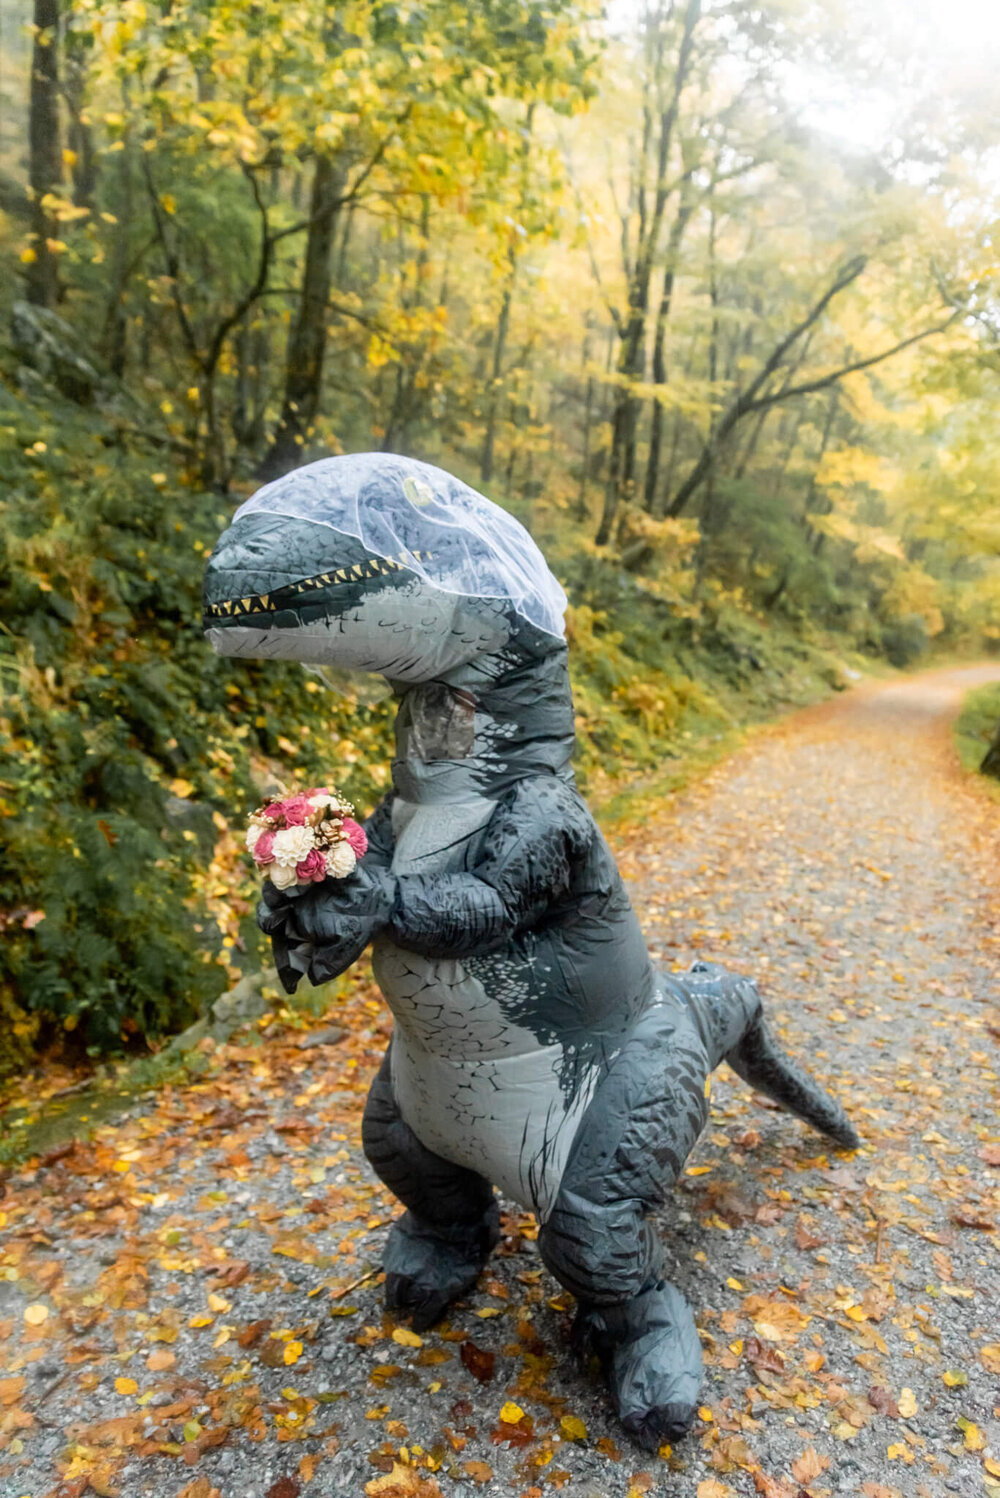 Bride in an inflatable dinosaur costumer with bouquet in asheville, nc mountains